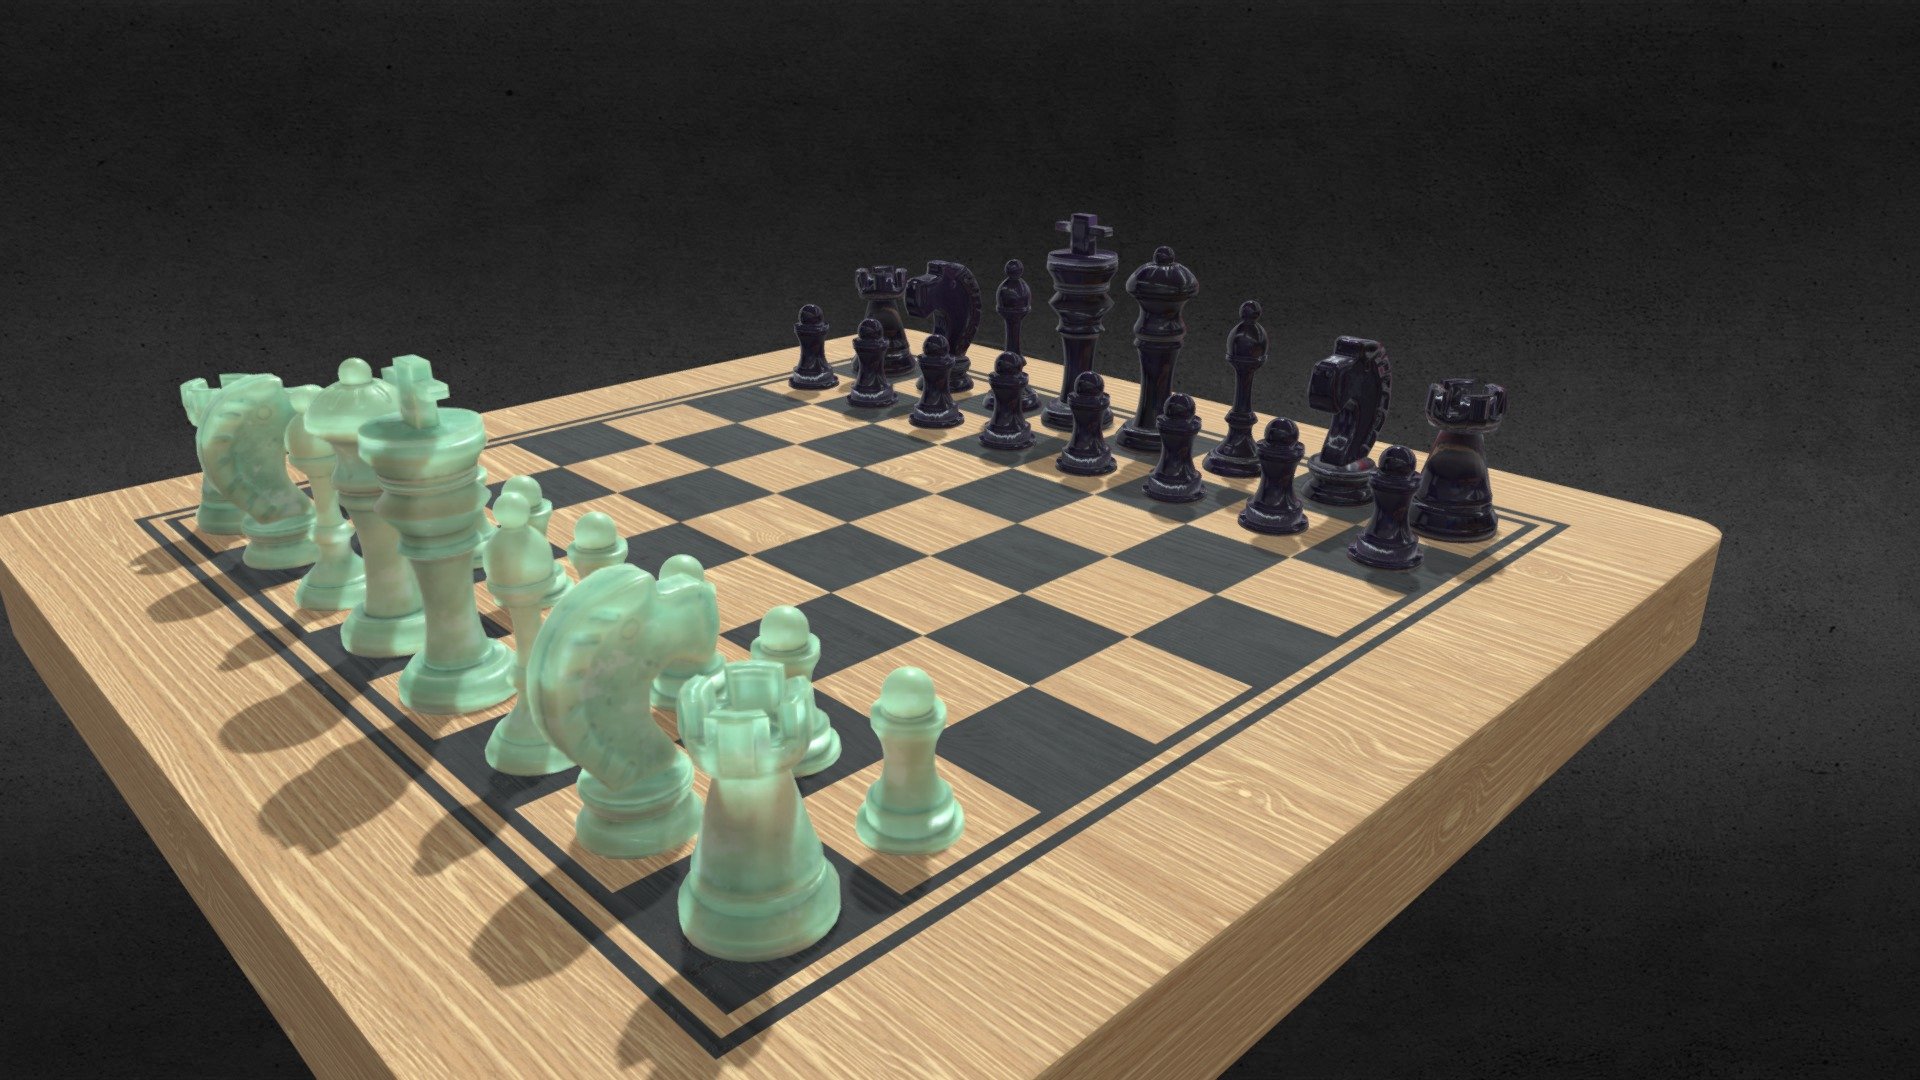 3d model of a Jade Chess ( Low Poly, PBR map  ) .

This product is made in Blender and ready to render in Evee . Unit setup is metres and the models are scaled to match real life objects.

The model comes with textures and materials and is positioned in the center of the coordinates system.

No additional plugin is needed to open the model.

Notes:

Geometry: Polygonal

Textures: Yes

Rigged: No

Animated: No

UV Mapped: Yes

Unwrapped UVs: Yes, non-overlapping

Bake all map

Note: don't forget to take a few seconds to rate this product, your support will allow me to continue working .

Thanks in advance for your help and happy blending!

Hope you like it! Thank you! - Jade Chess - Buy Royalty Free 3D model by Toss90 3d model